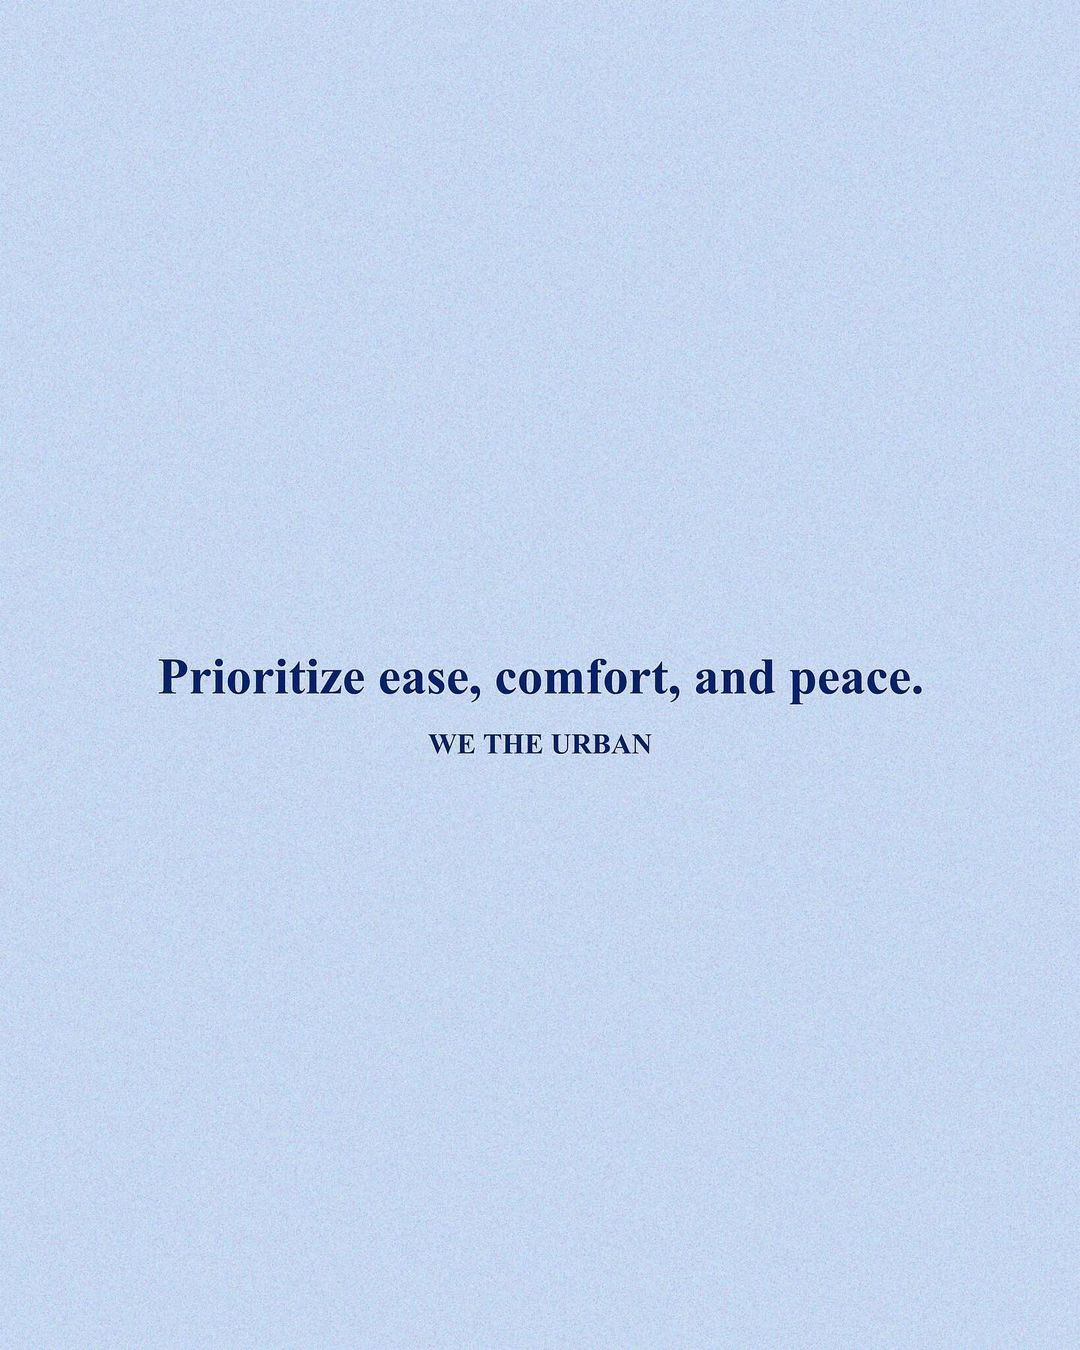 A blue quote on a blue background that reads, "Prioritize ease, comfort, and peace. - WE THE URBAN"